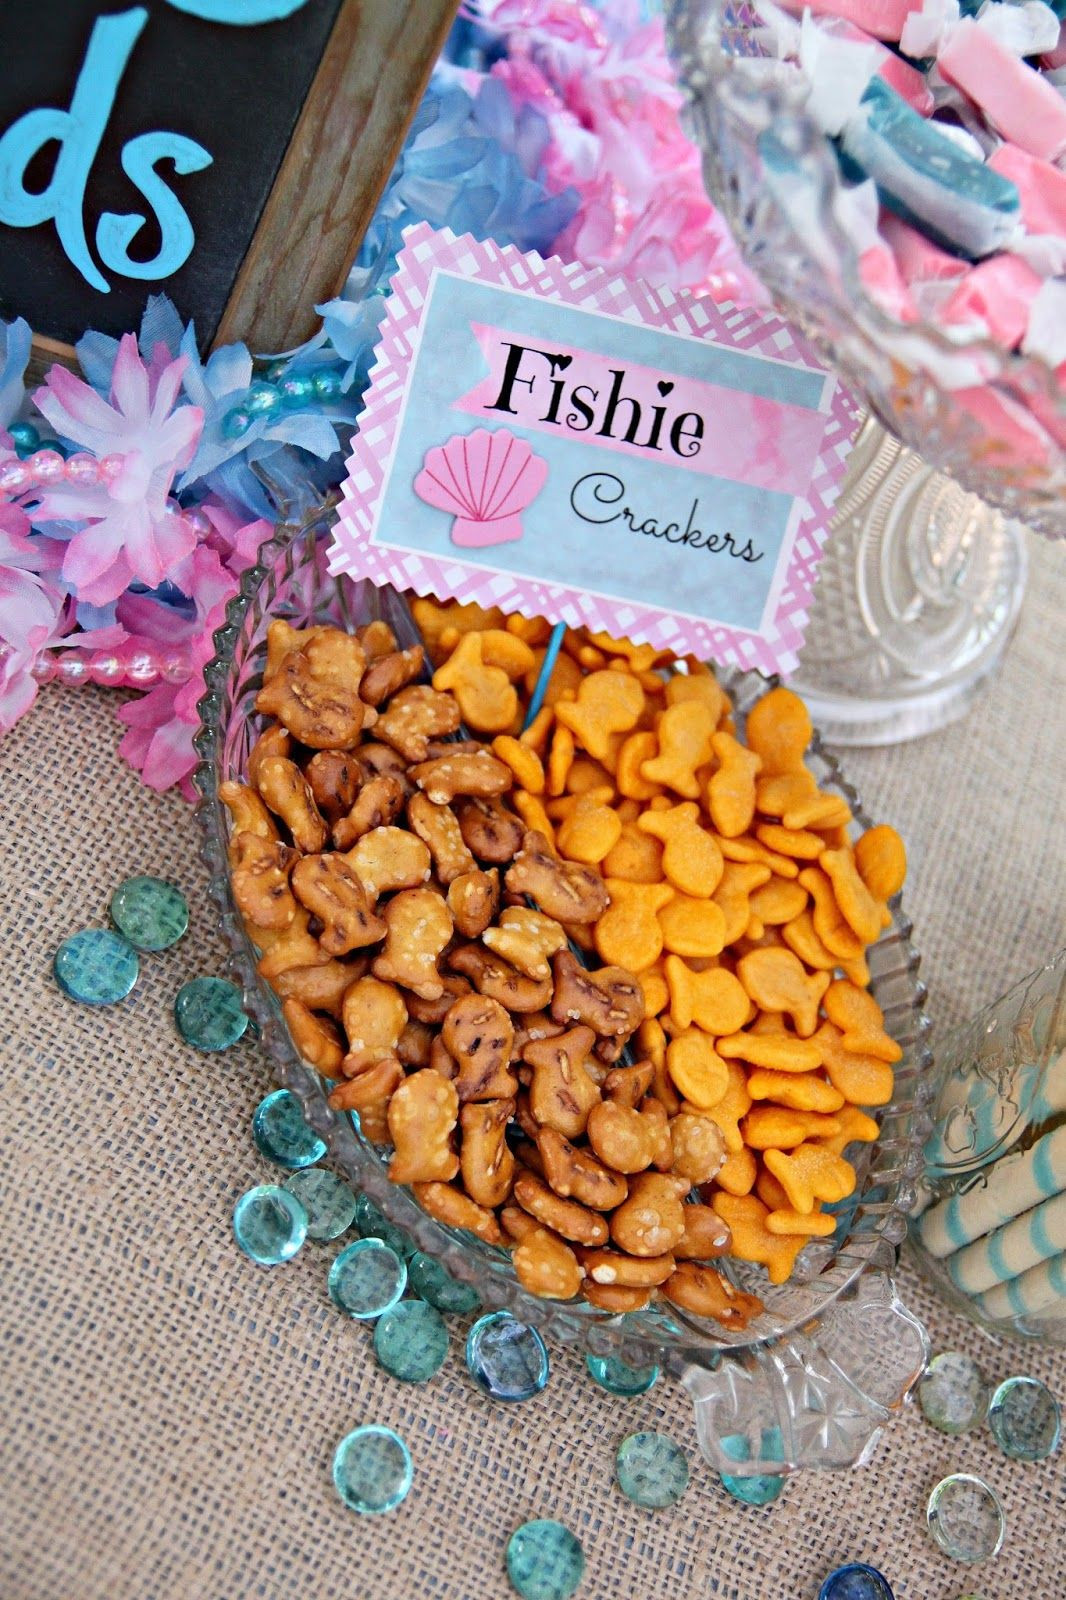 The Little Mermaid Party Food Ideas
 Mermaid Birthday Party Food Can t have an under the